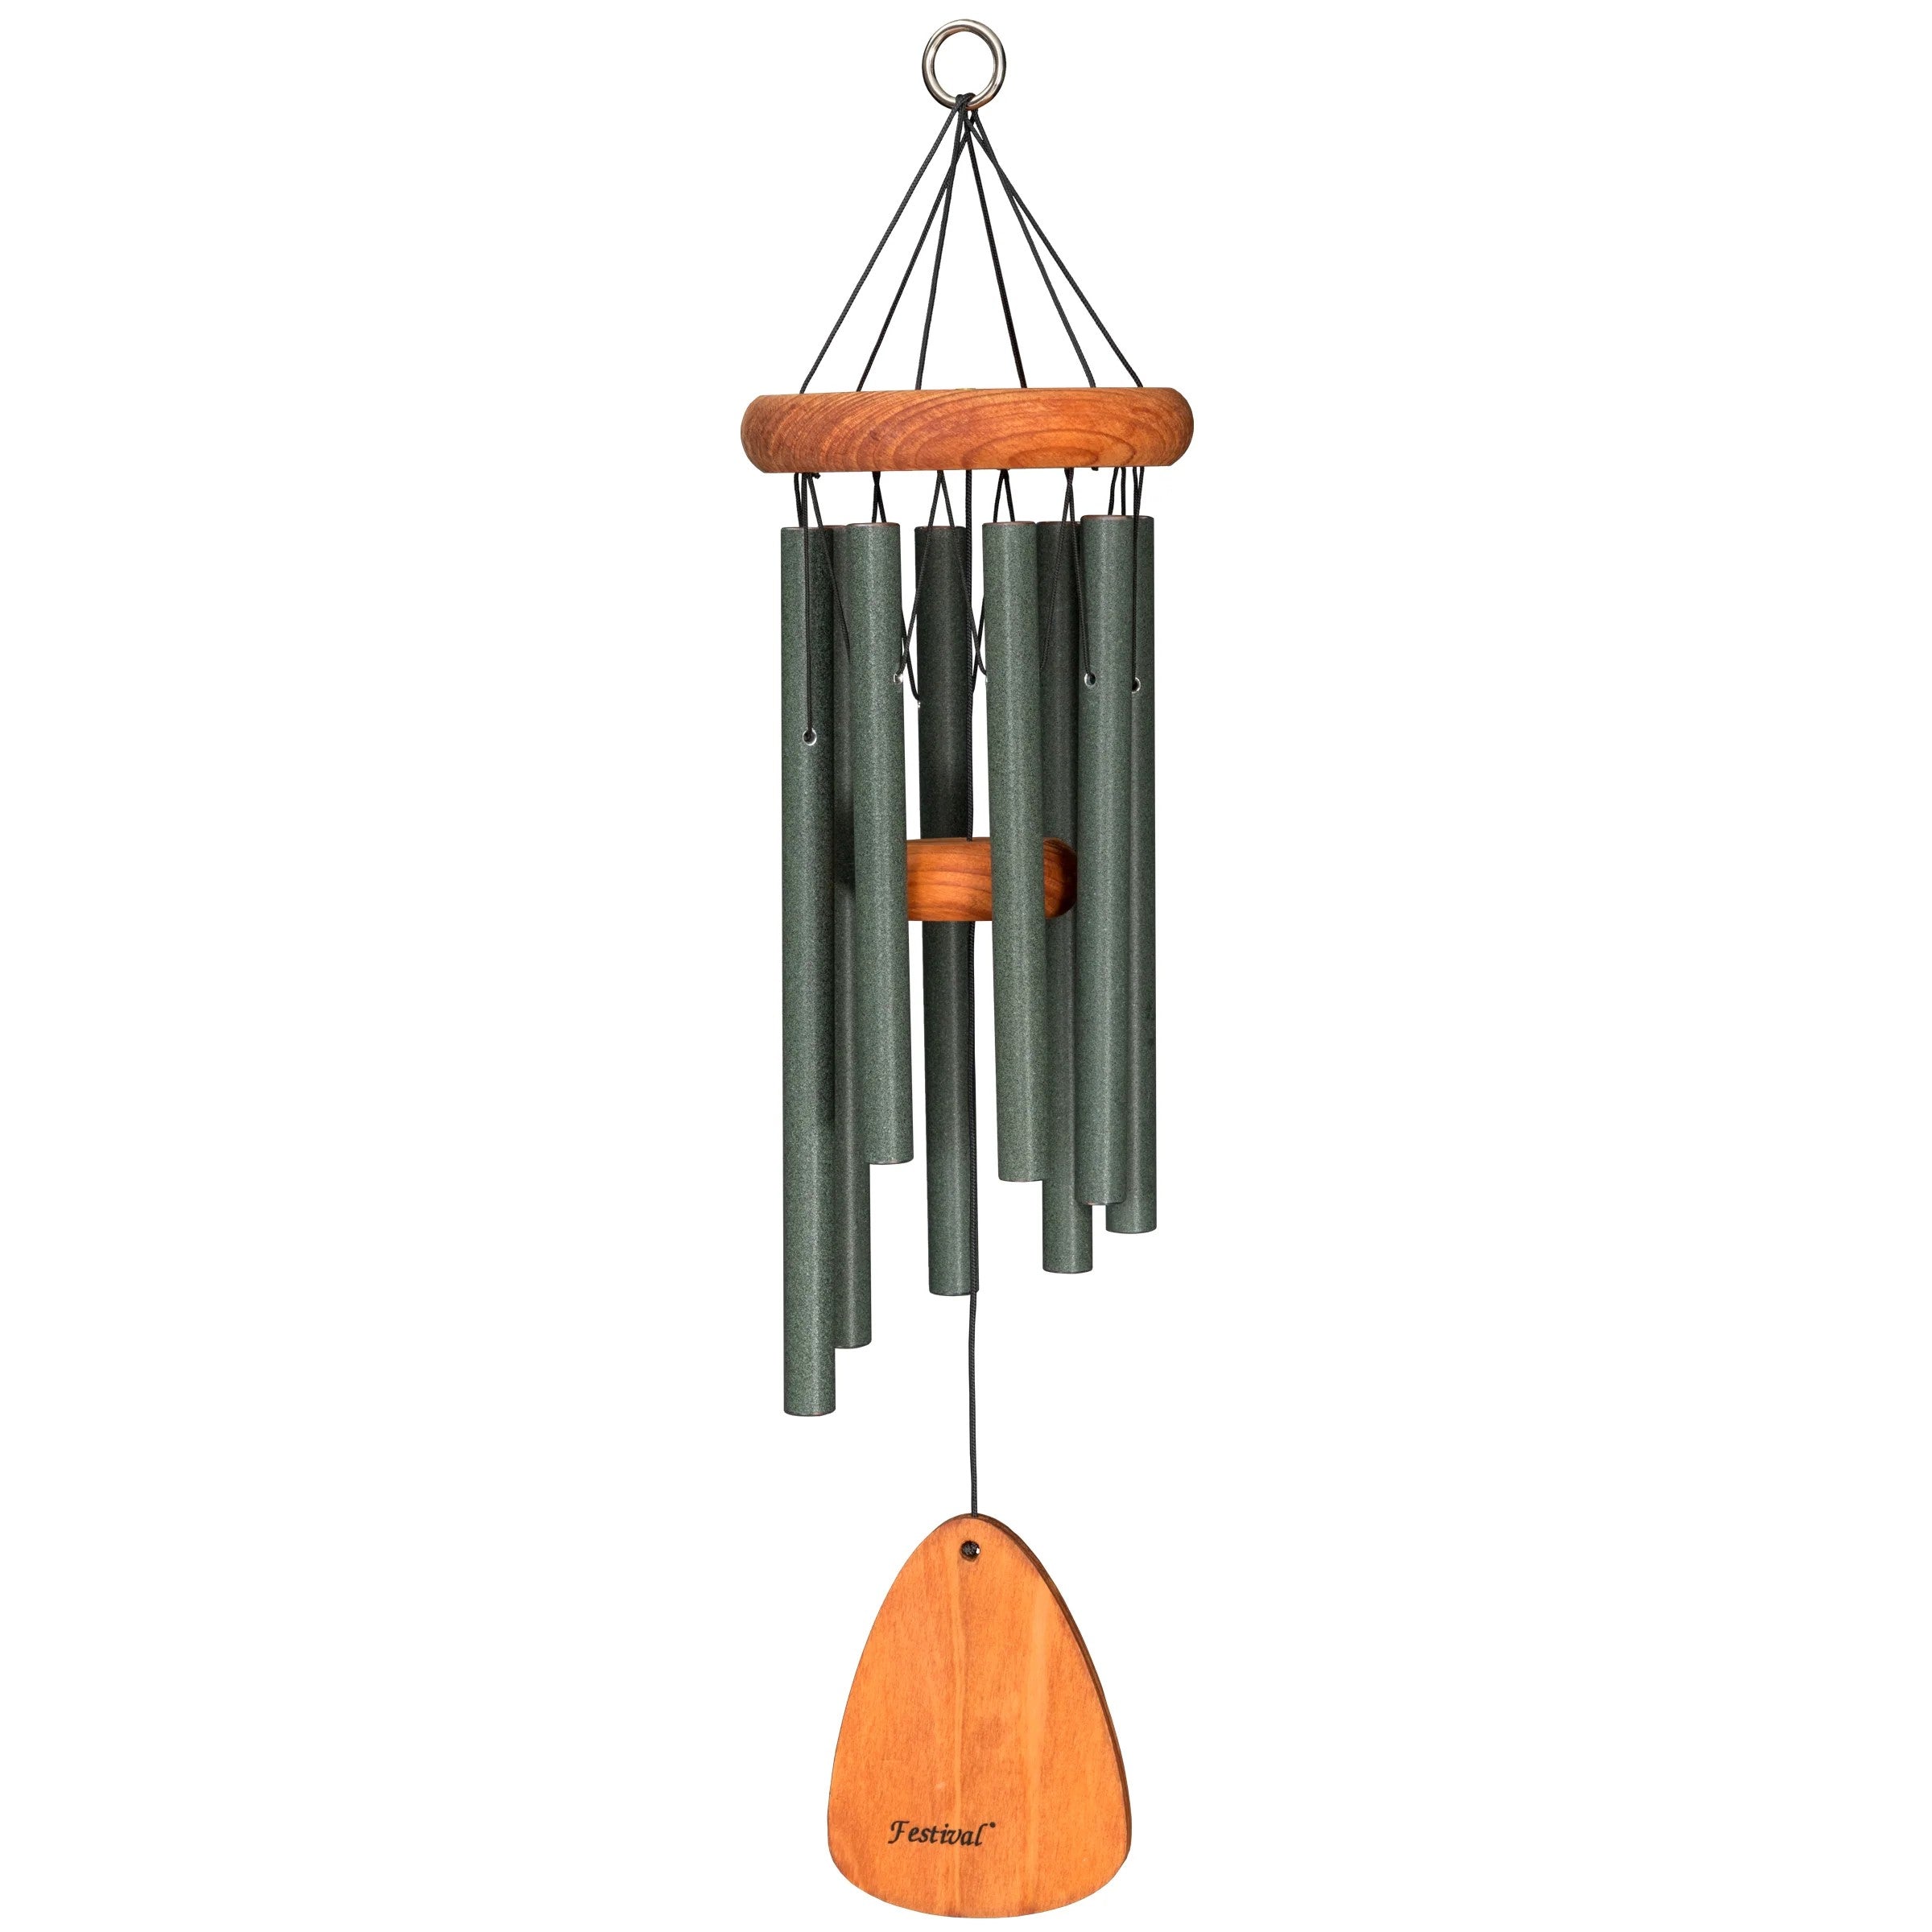 24" Windchime with 8 Tubes